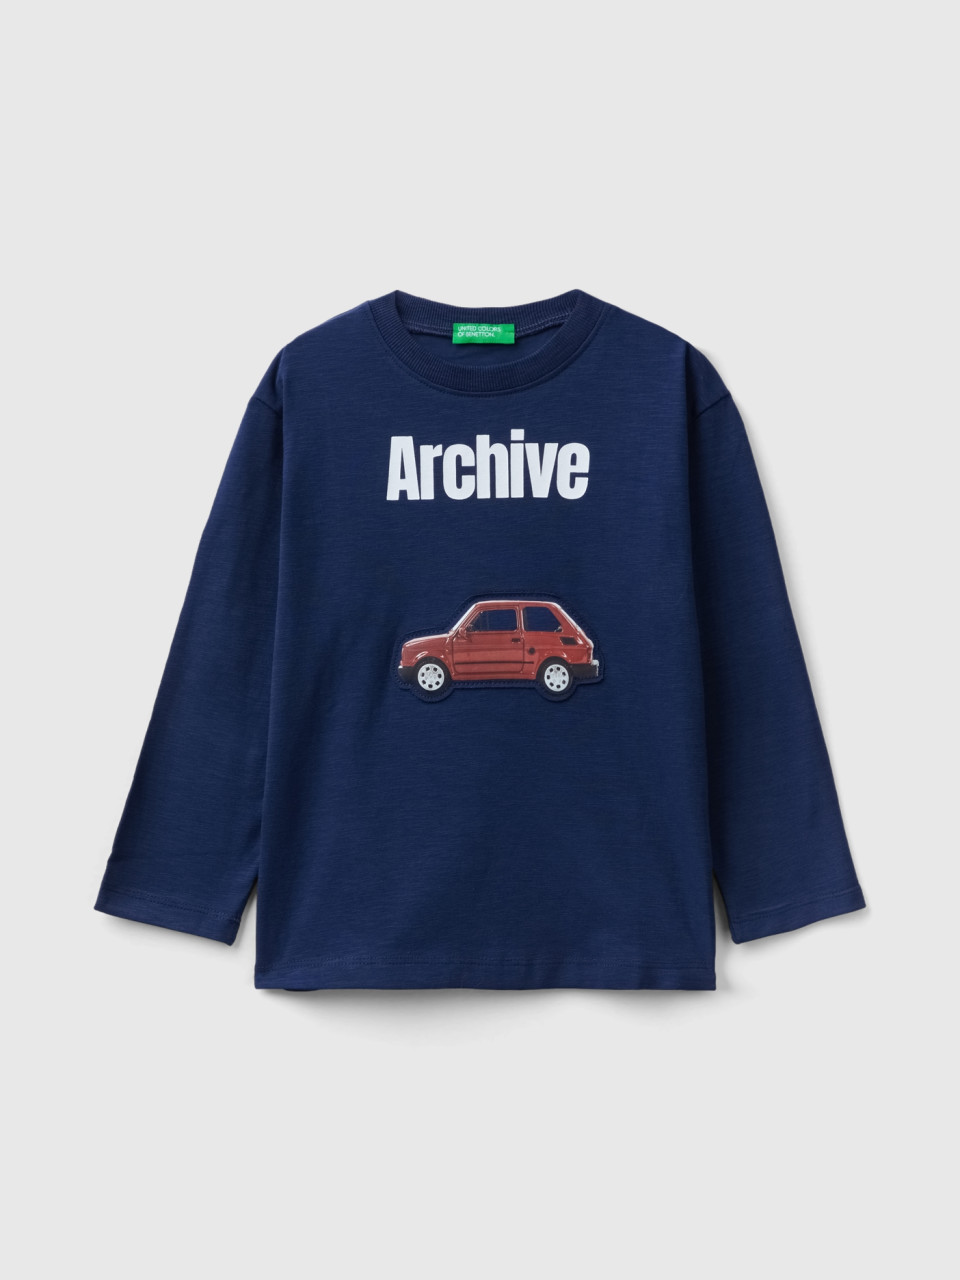 Benetton, Oversized Fit T-shirt With Print And Patch, Dark Blue, Kids